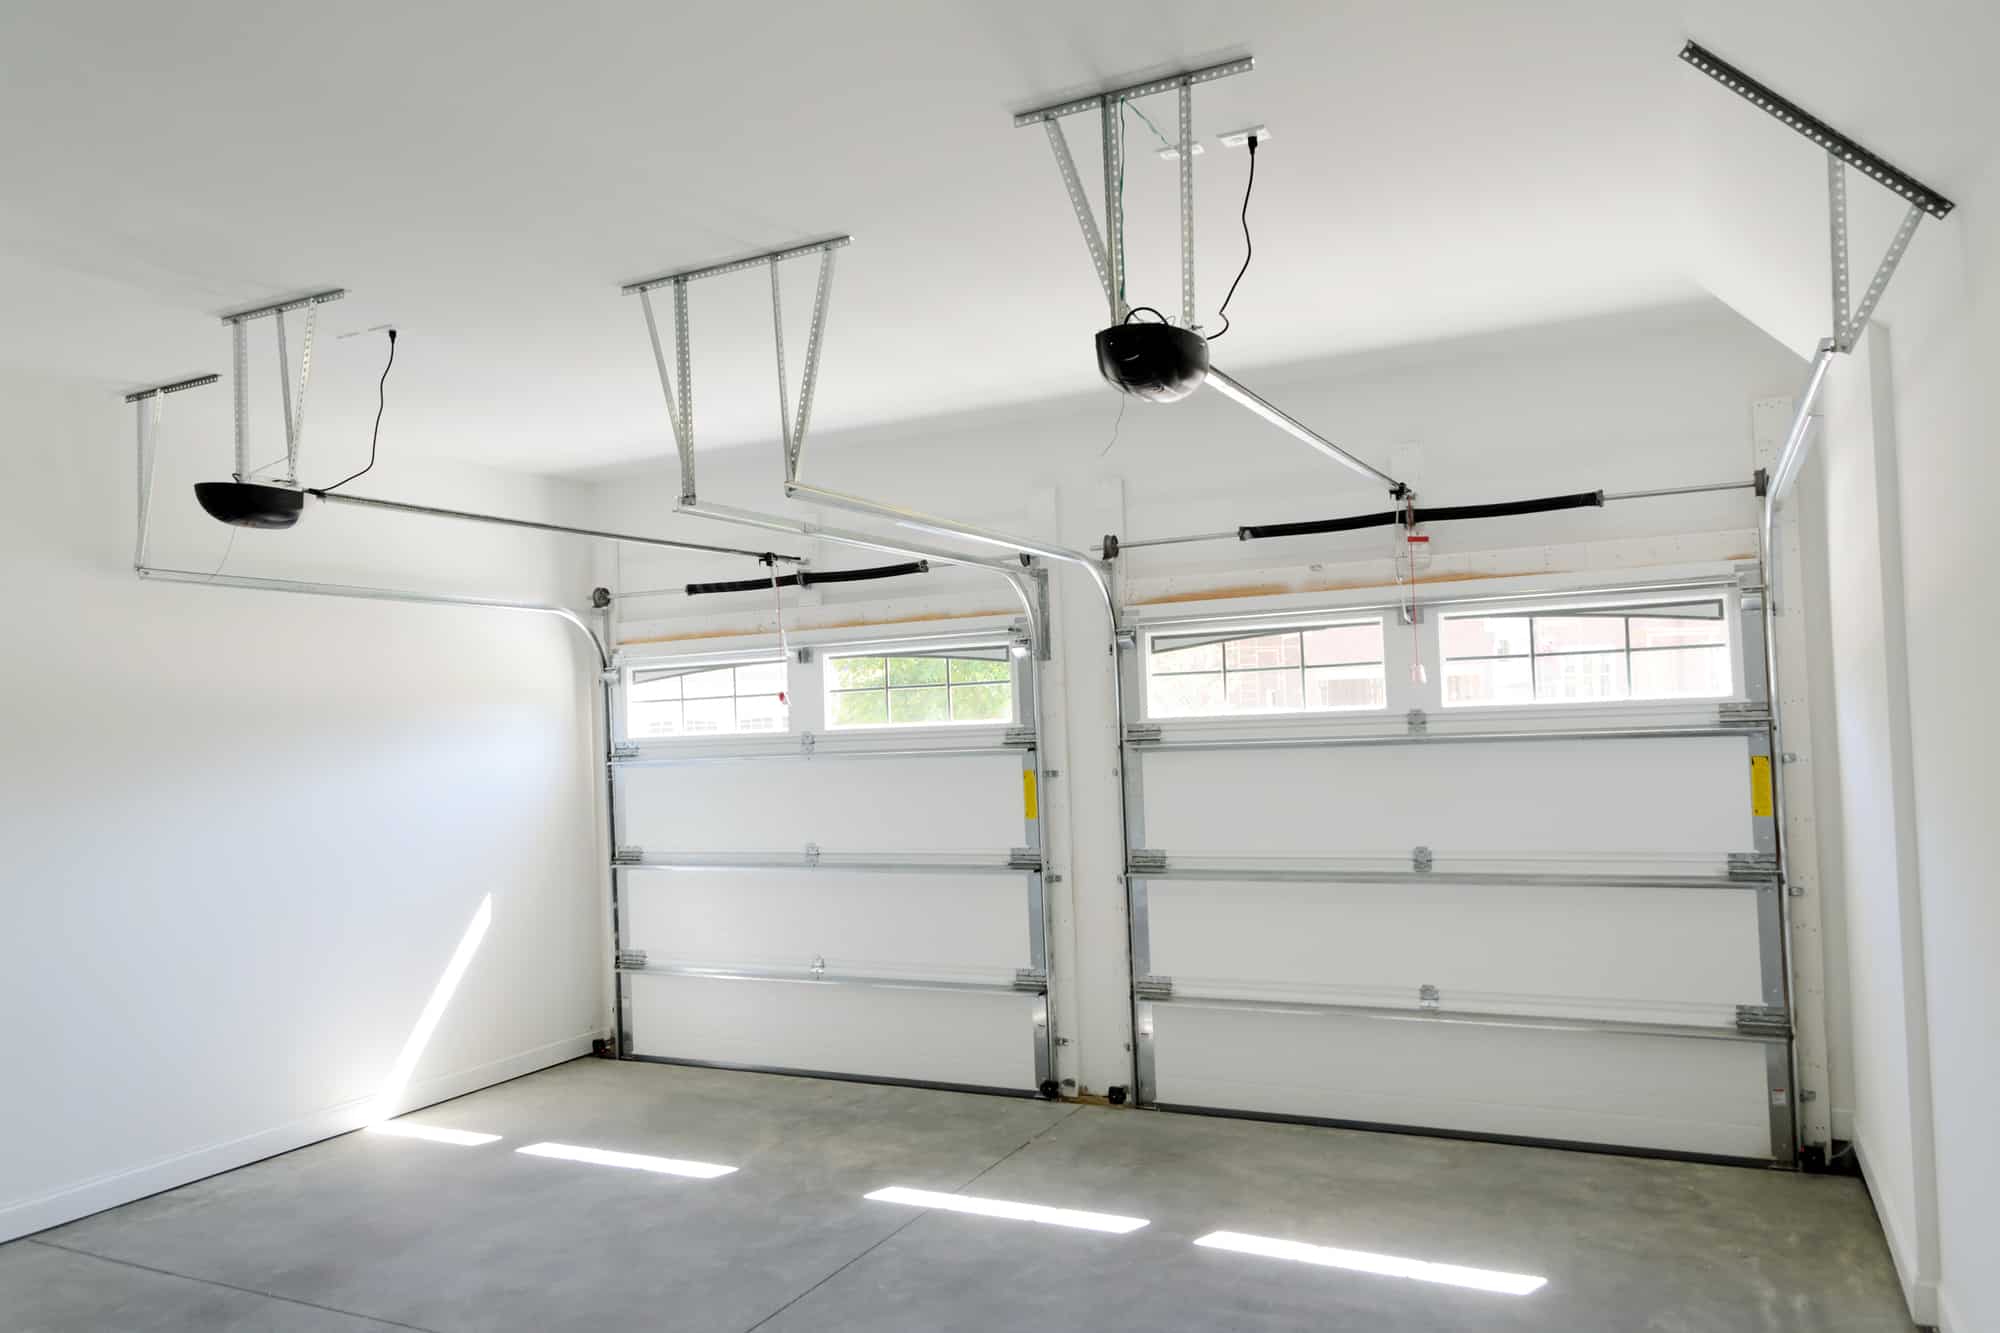 How to Heat Up a Cold Concrete Garage